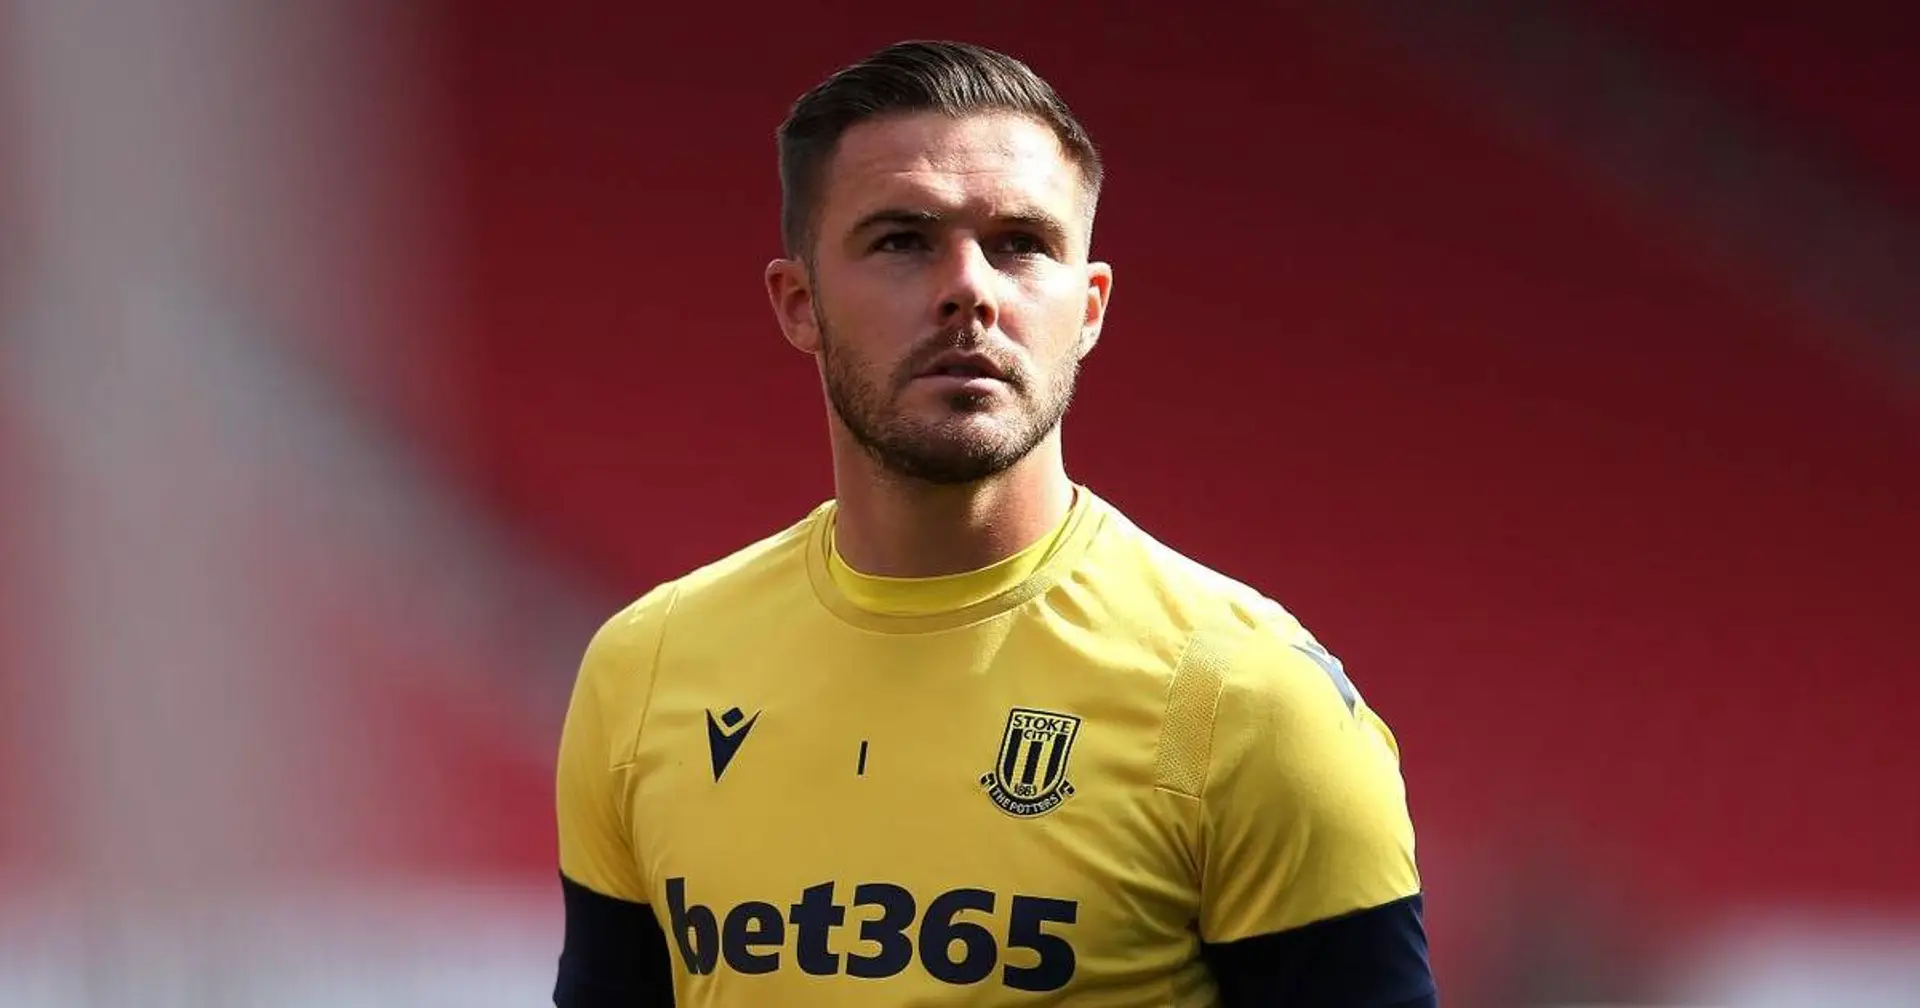 Liverpool have '0 interest' in signing Jack Butland (reliability: 4 stars)